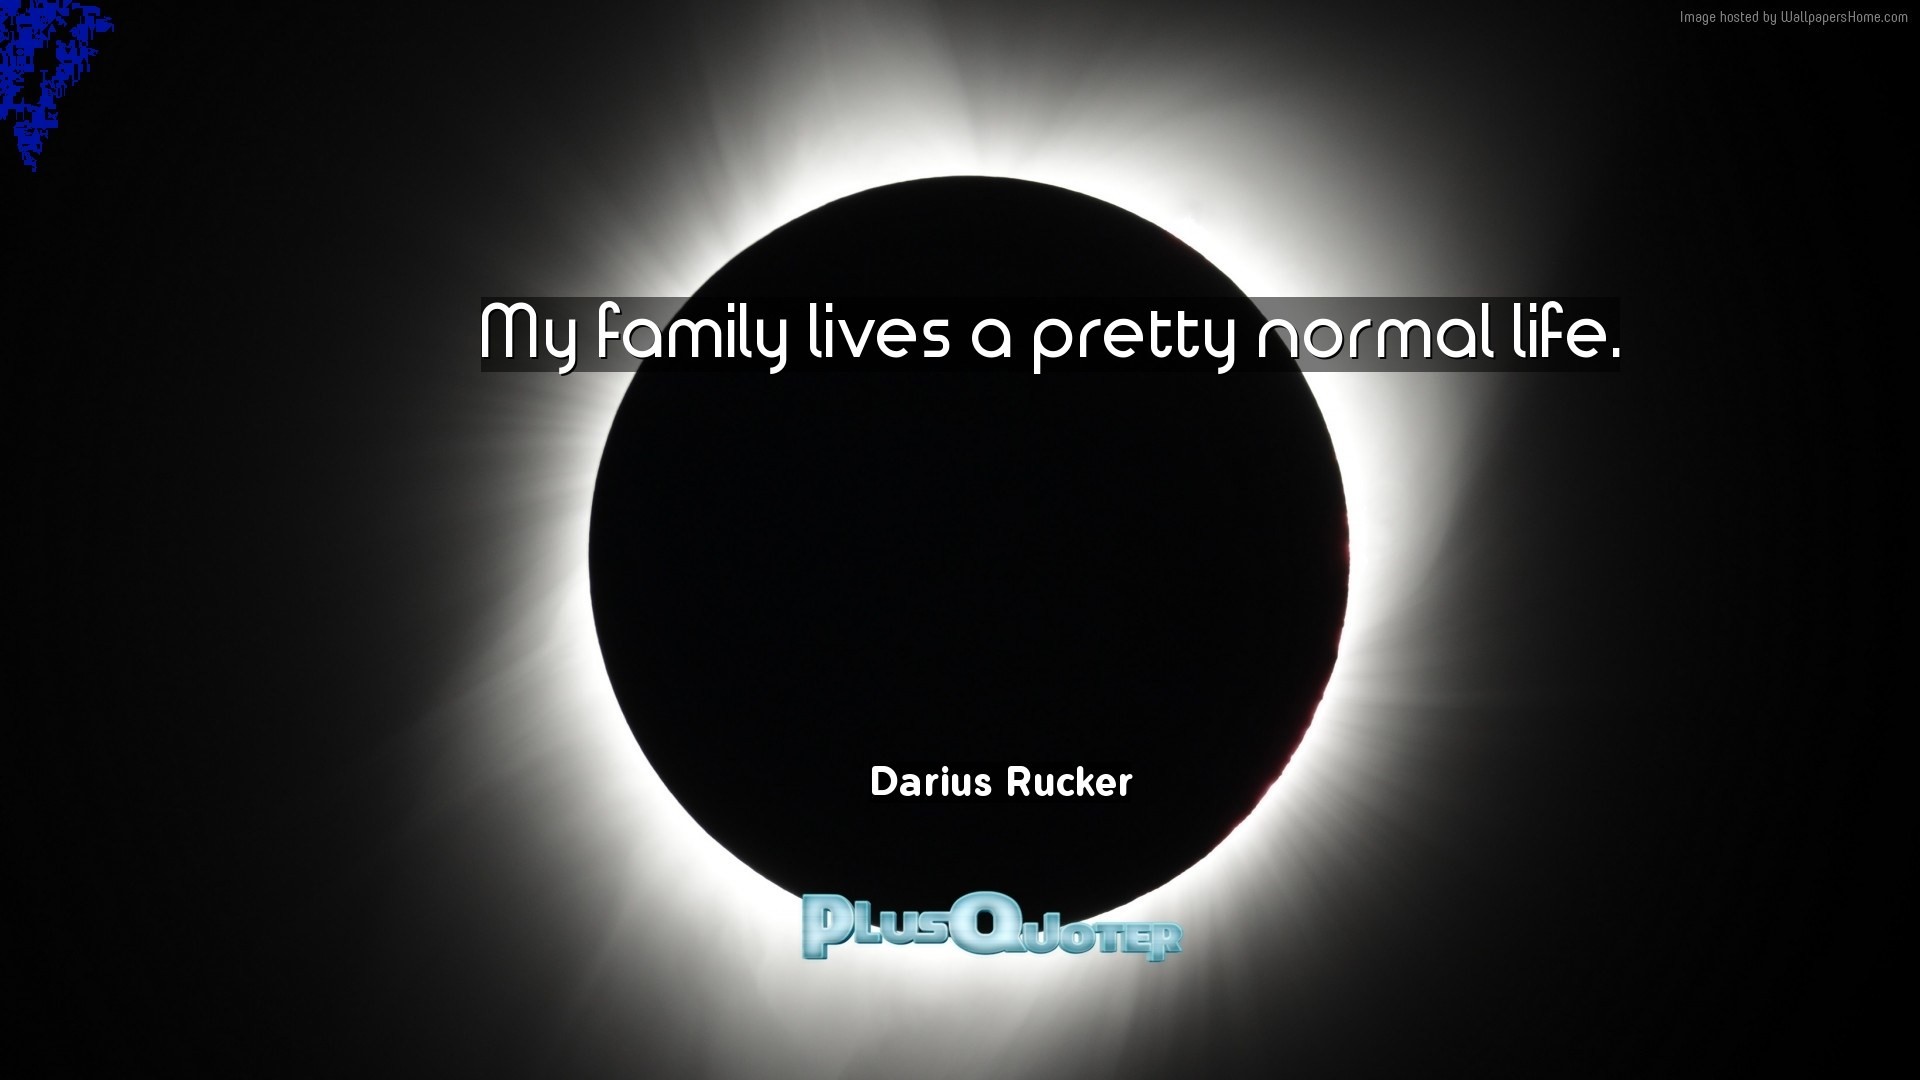 1920x1080 Download Wallpaper with inspirational Quotes- "My family lives a pretty  normal life."